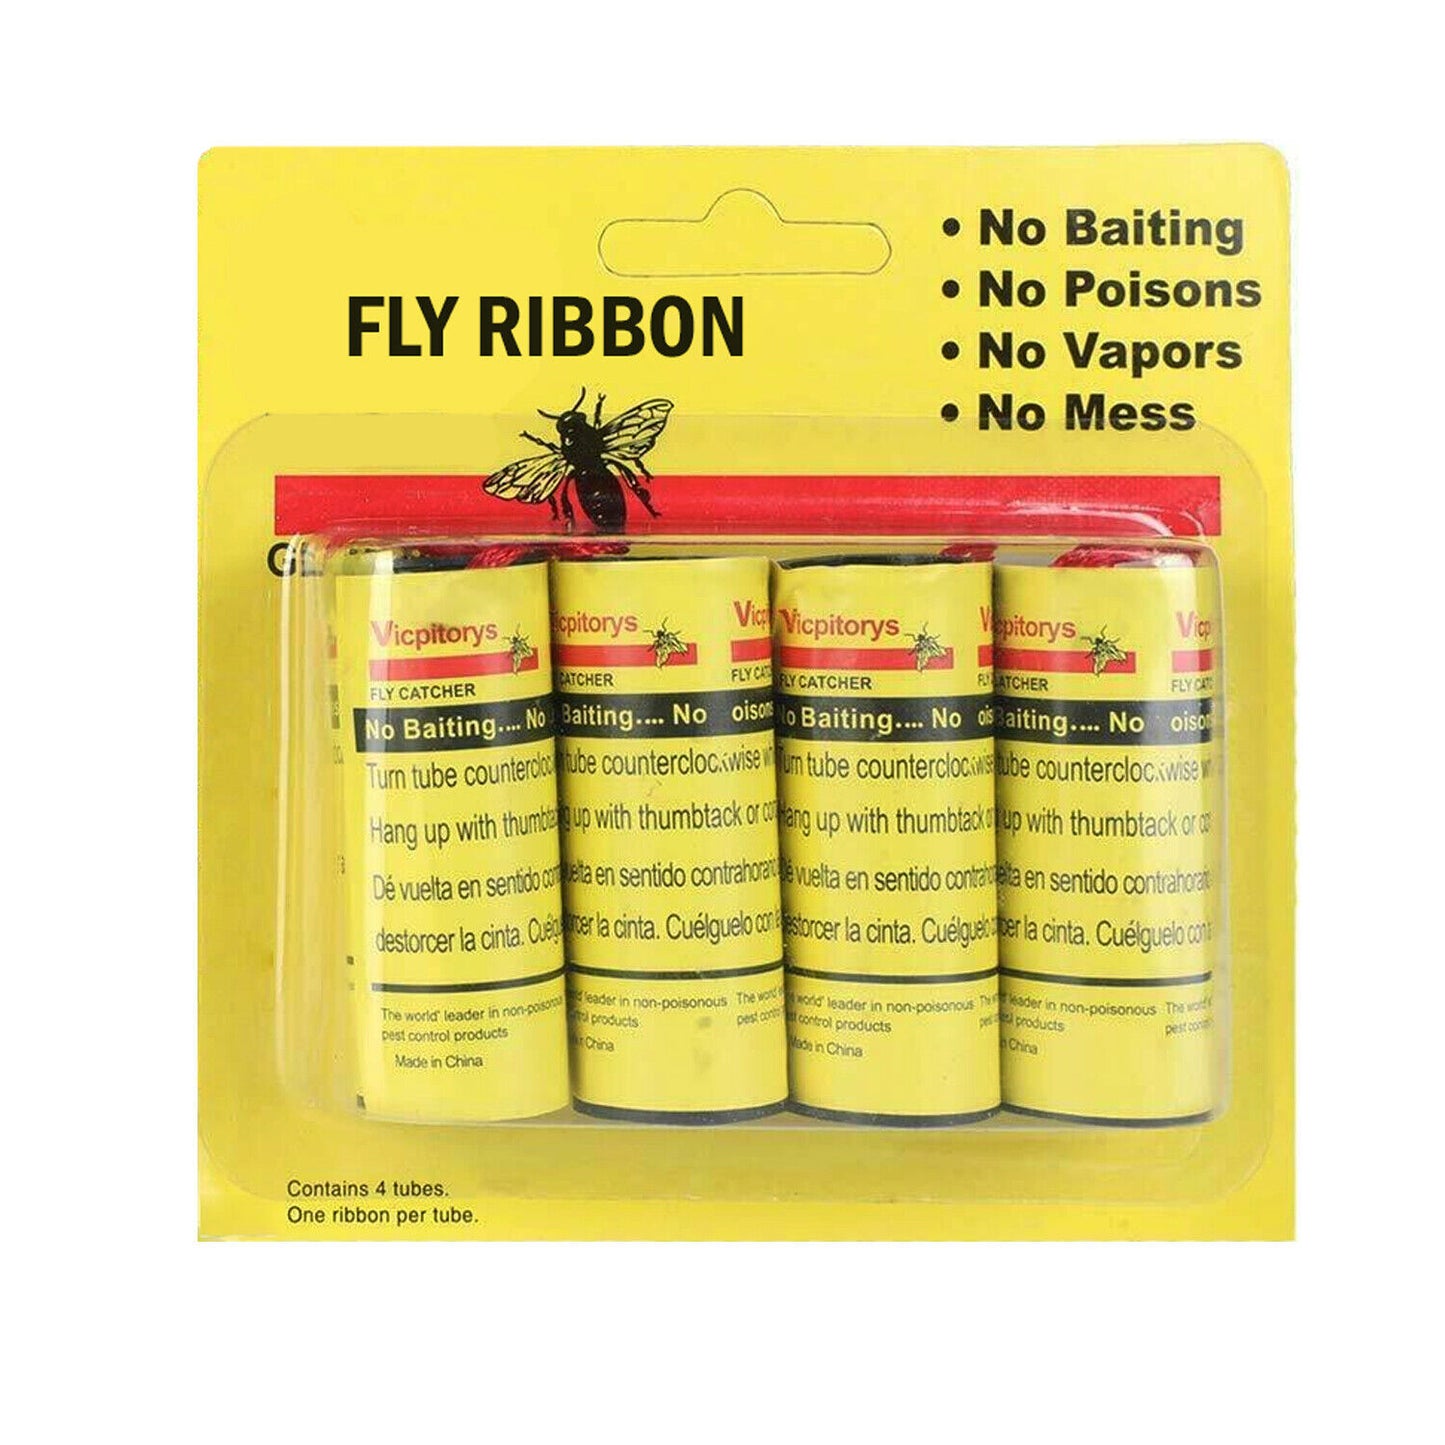 16 INSECT BUG FLY GLUE PAPER CATCHER TRAP RIBBON TAPE STRIP STICKY FLIES ROLLS